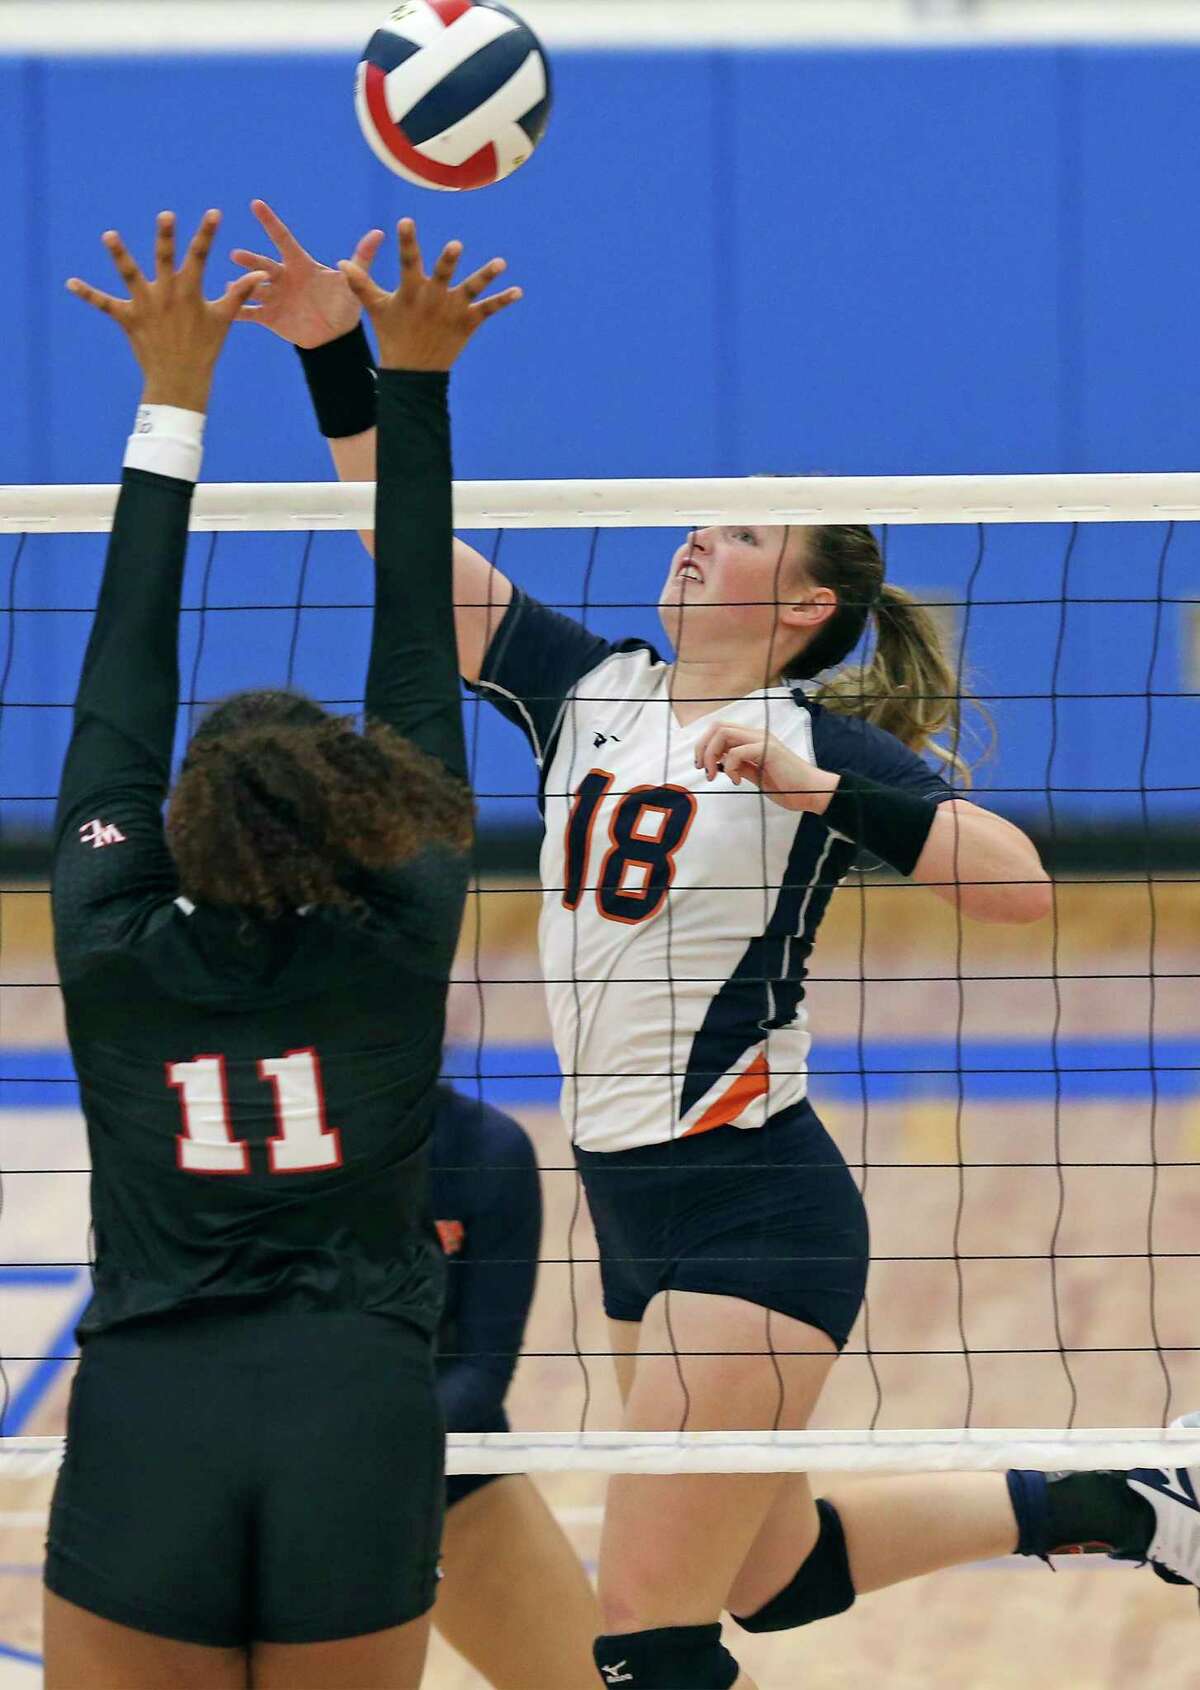 Selby Draker flips the ball for the Broncos as Brandeis hosts Churchill in the season opening volleyball match at Northside Sports Gym on August 6, 2019.